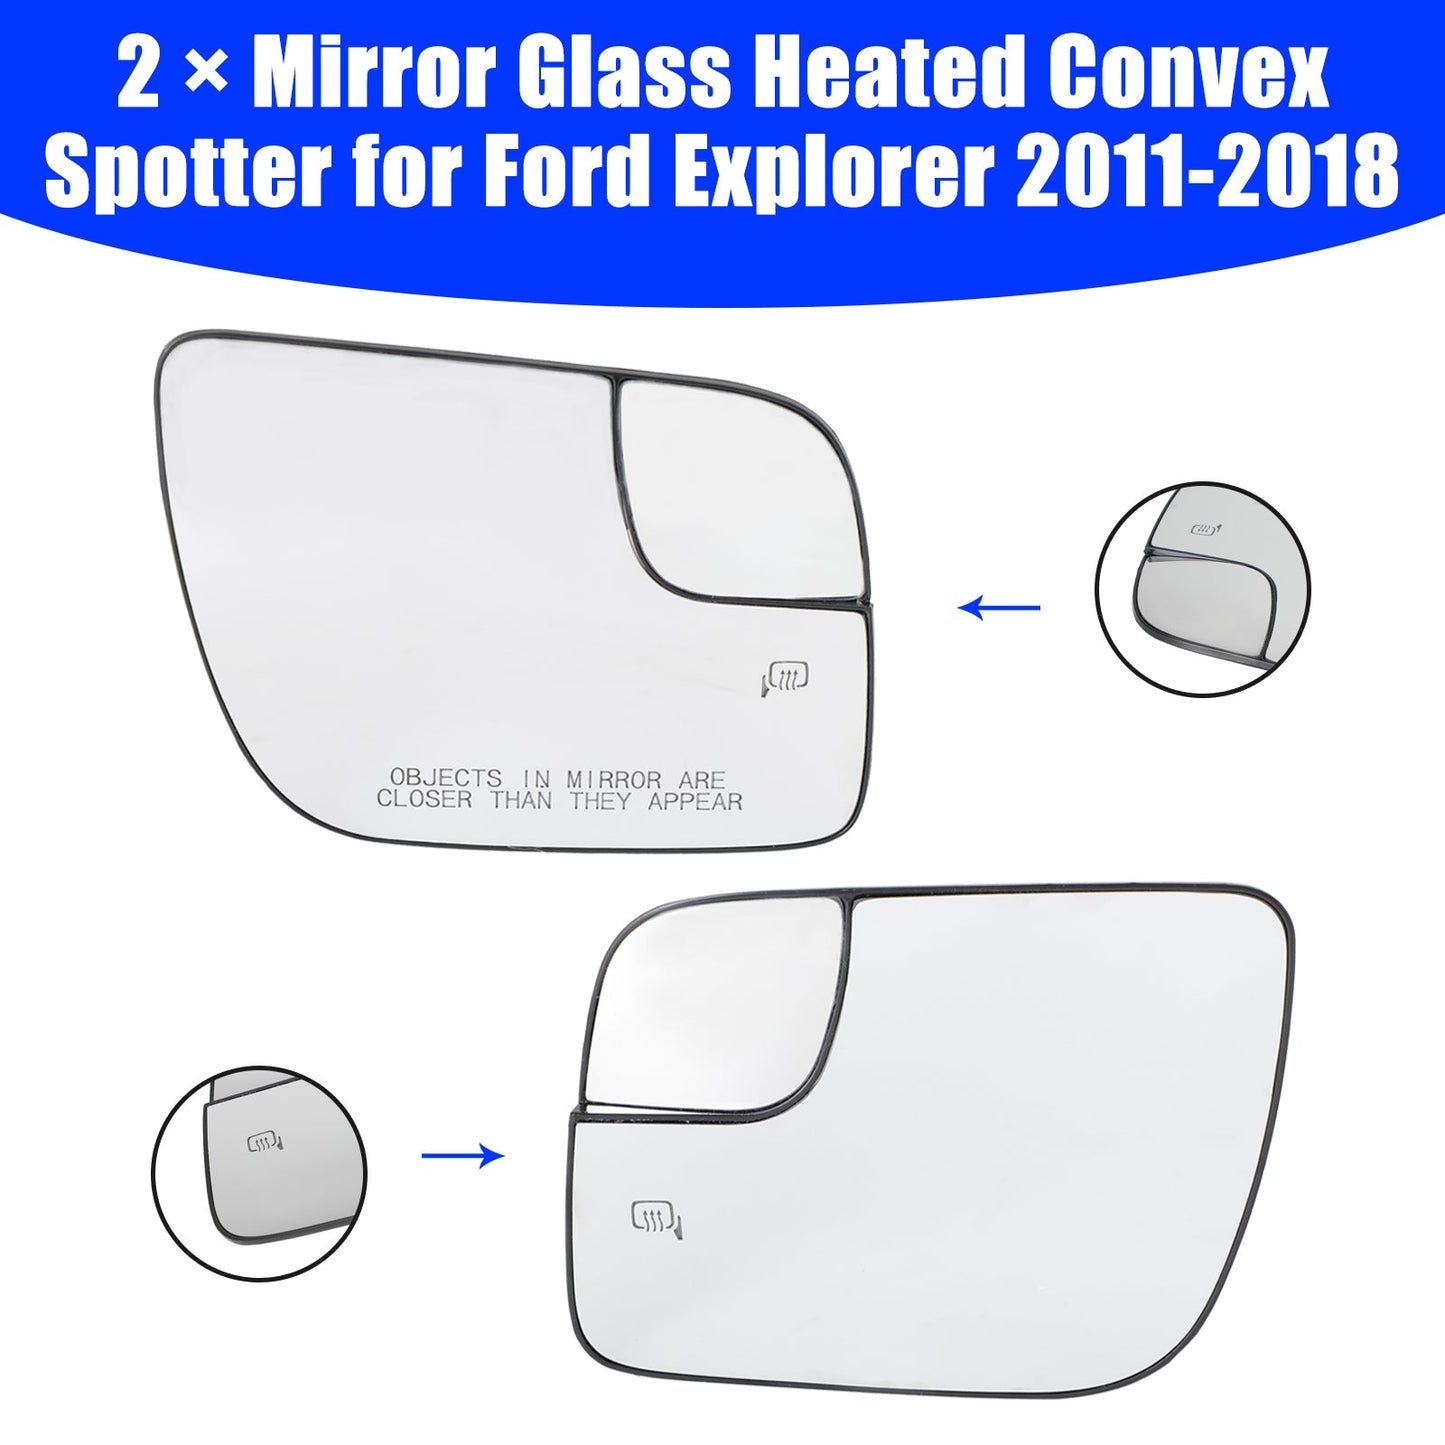 2 × Mirror Glass Heated Convex Spotter for Ford Explorer 2011-2018